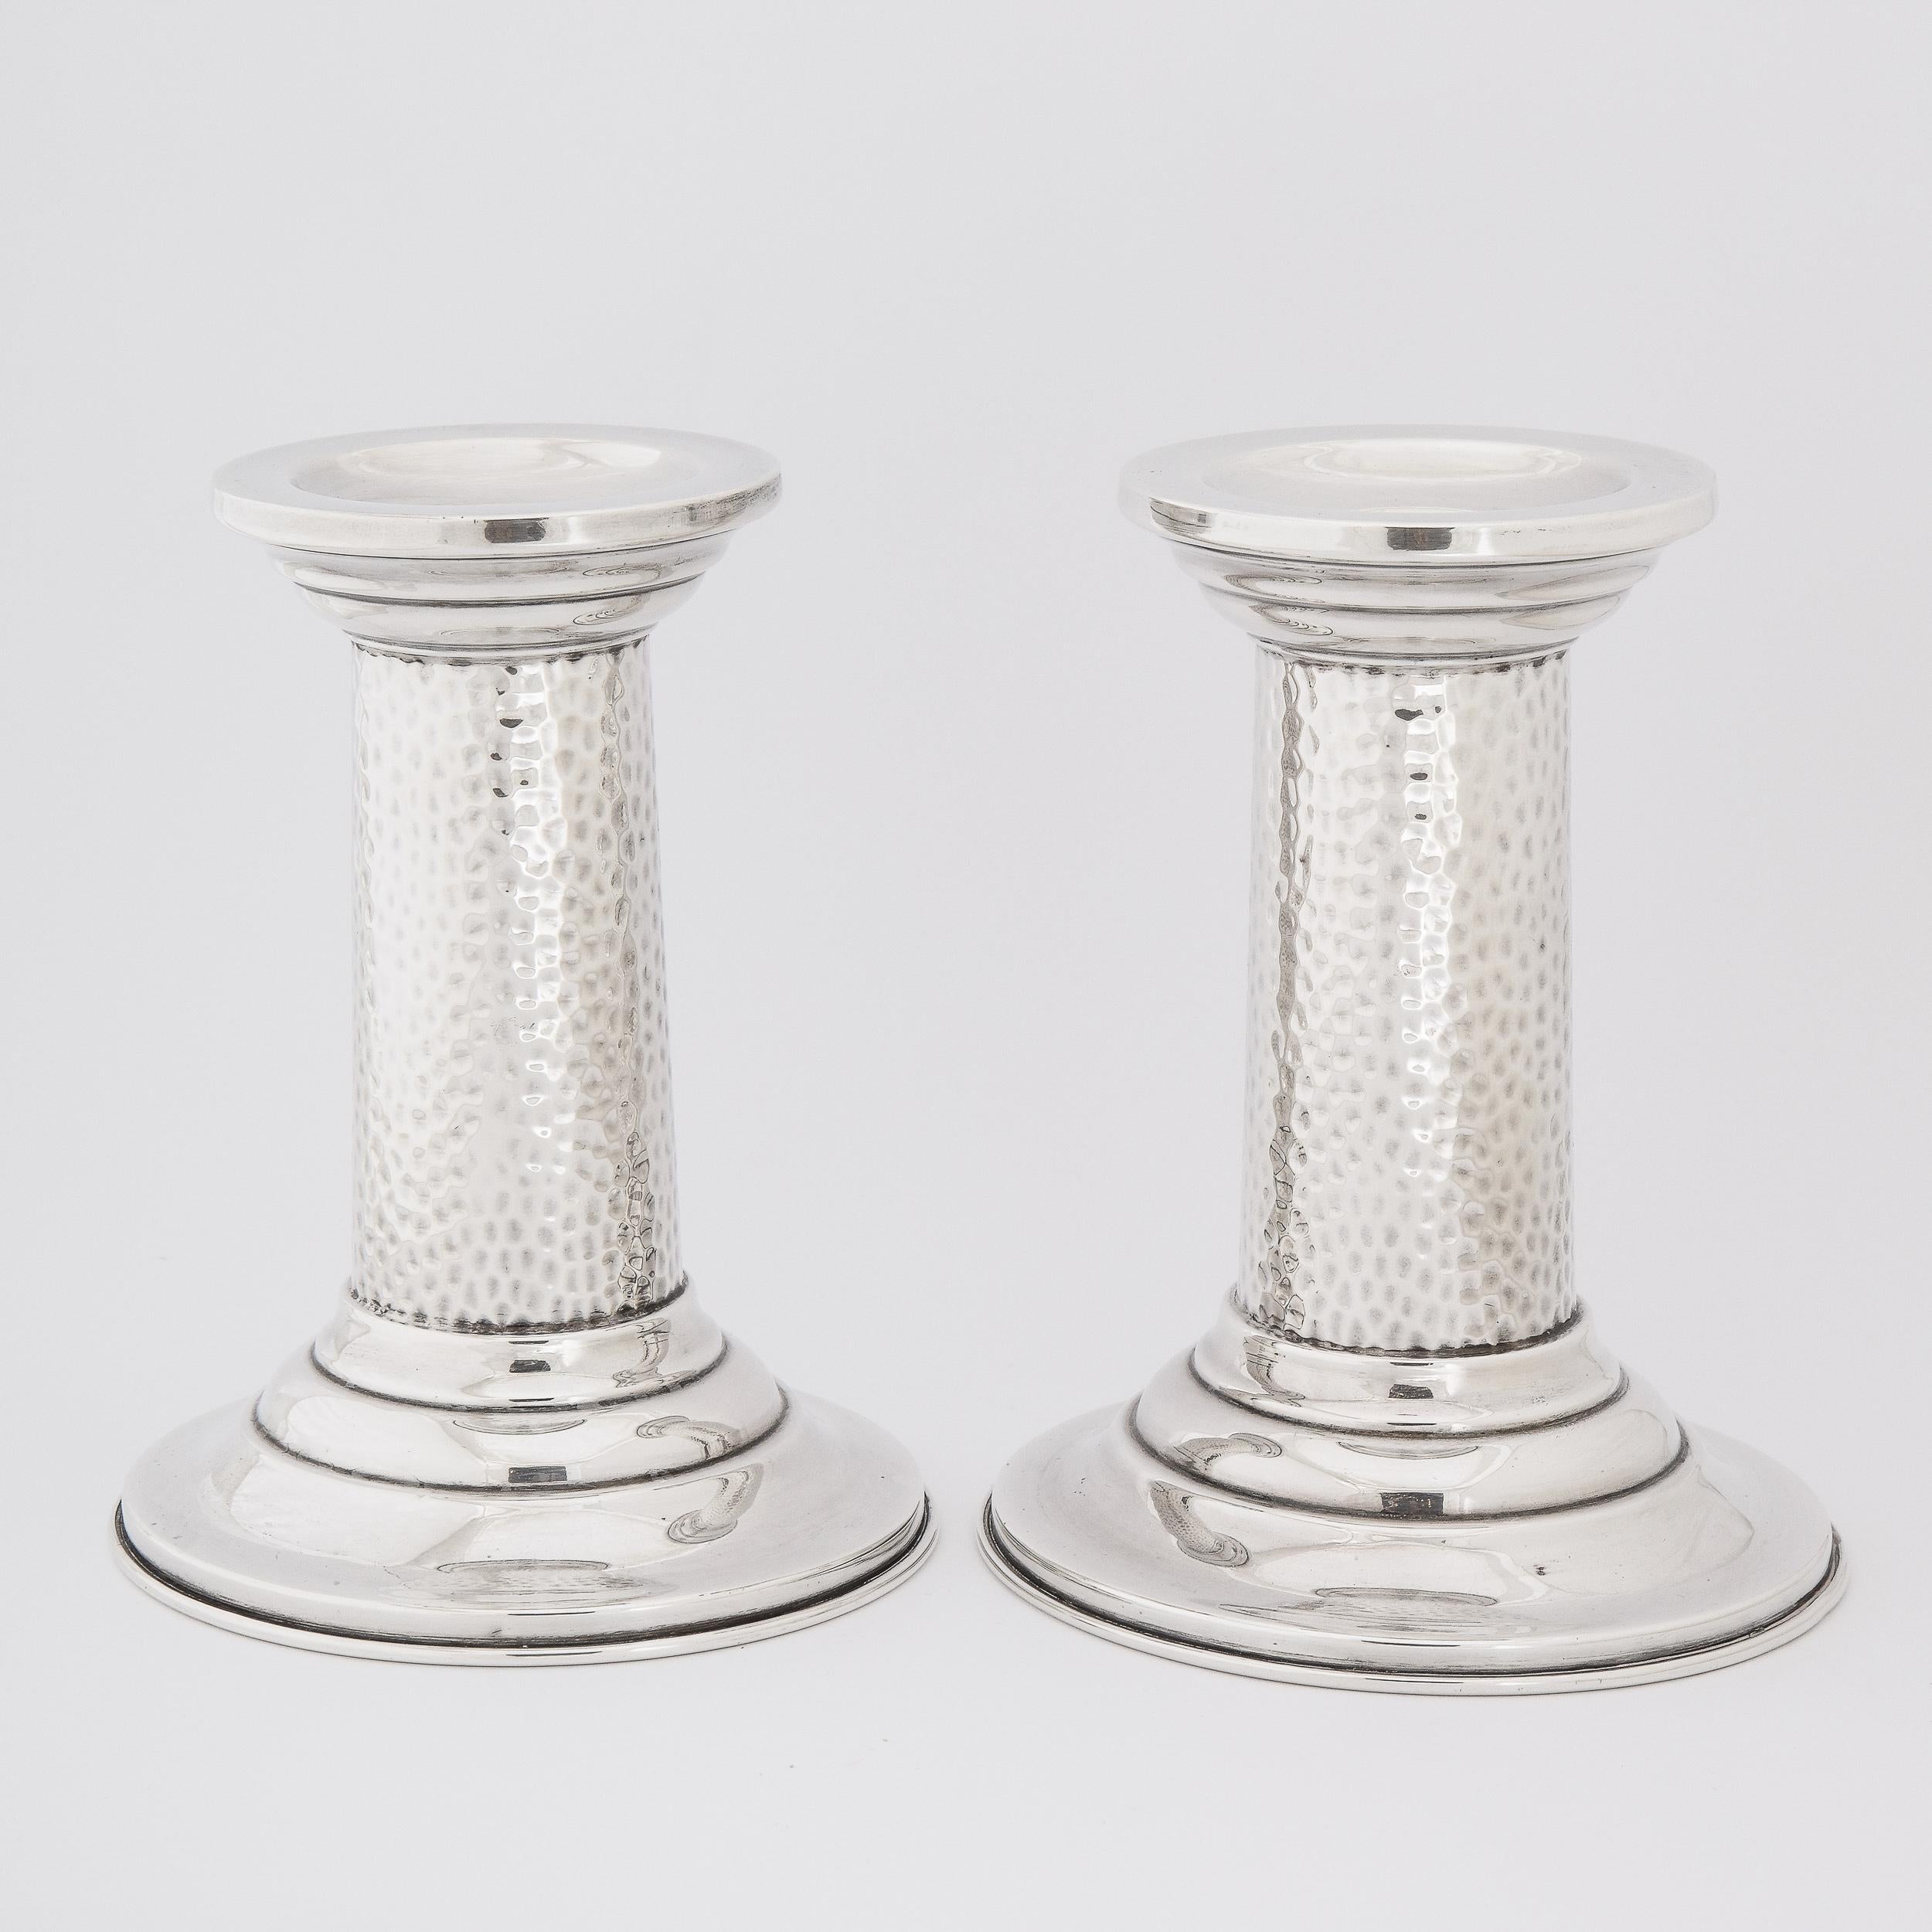 This elegant pair of candlesticks were realized in England circa 1960. They feature tiered concentric circular bases from which hand hammered cylindrical bodies- with a wonderful organic dappled texture- ascend, culminating in circular tiered necks.